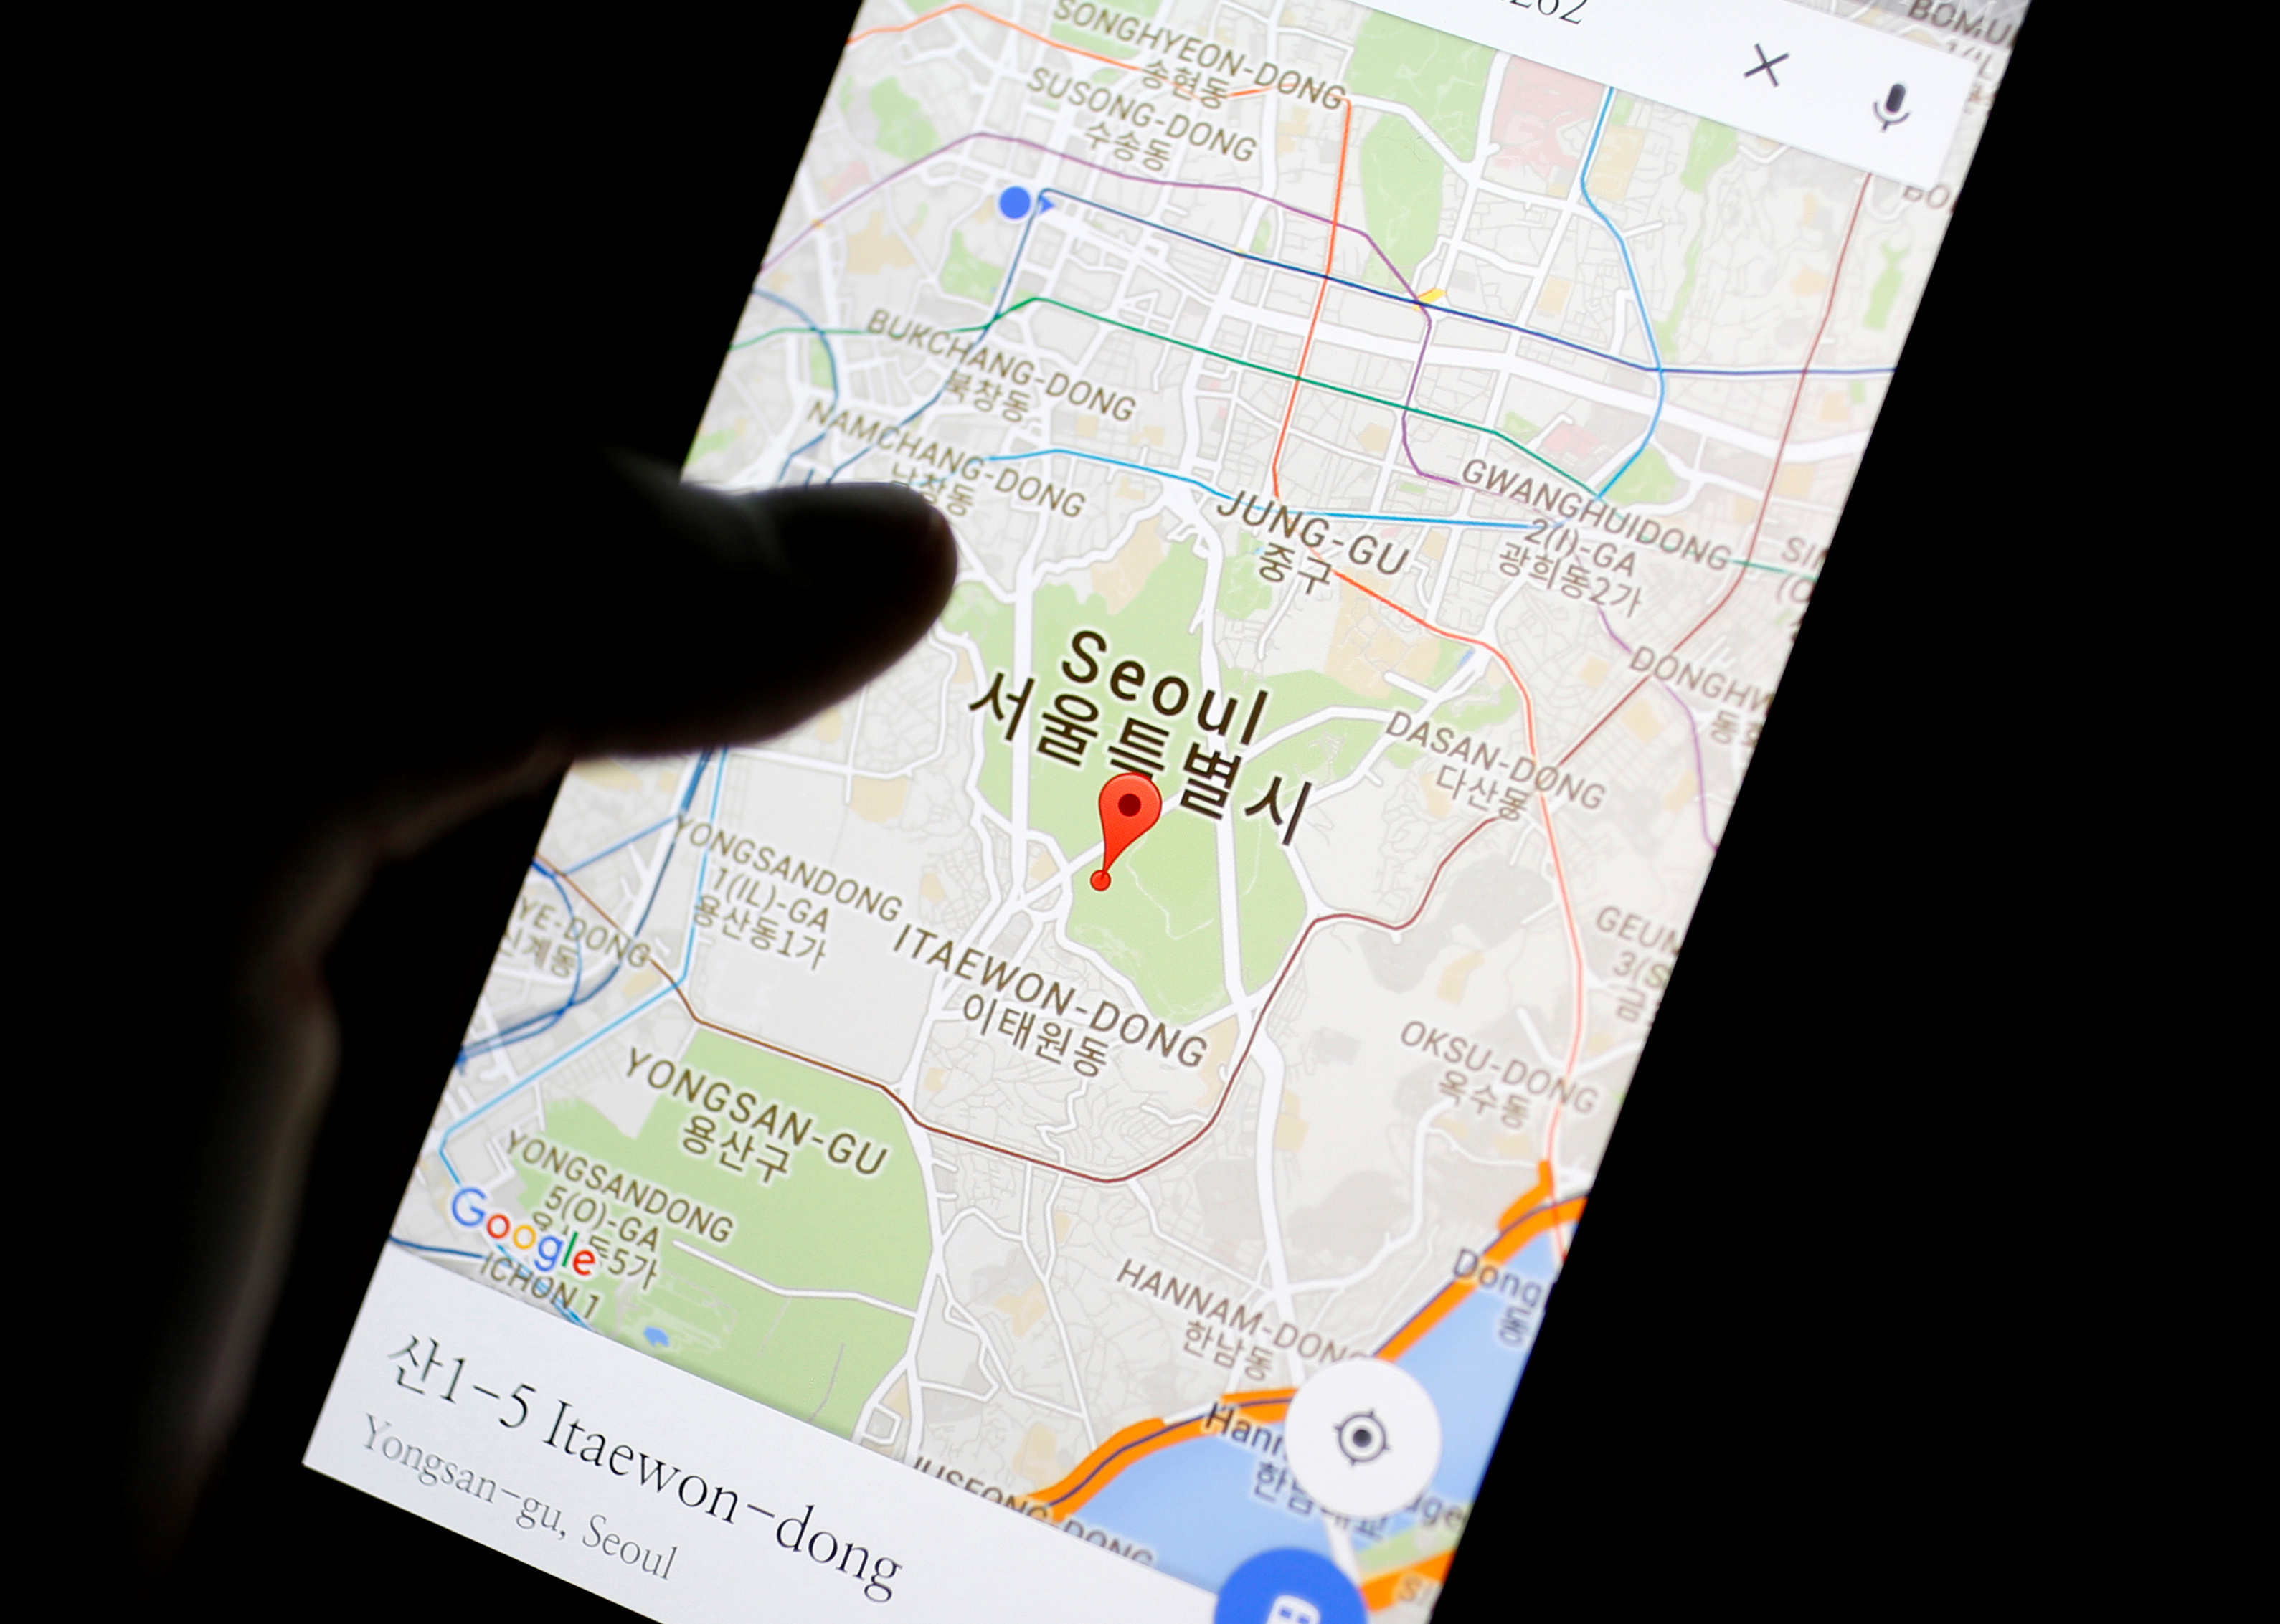 Google Maps Allows Ios, Android Users to Edit Roads